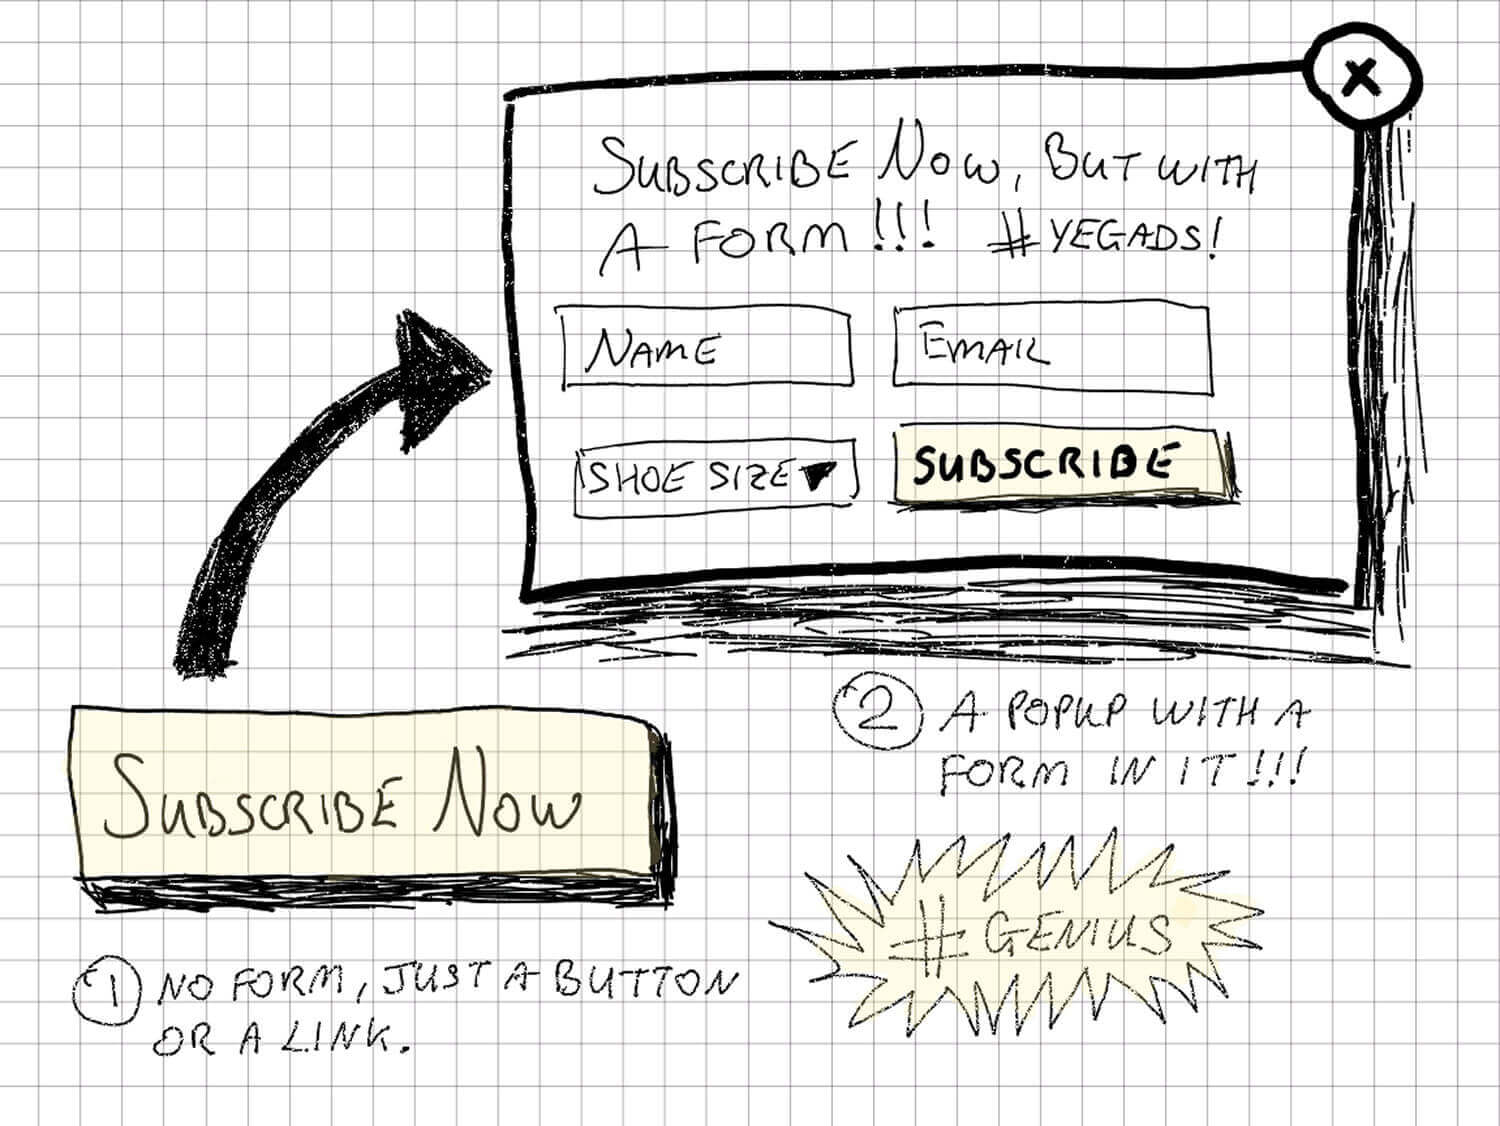 A sketch-guide showing 2 ways to get the leads to subscribe. 1- No form, just a button or a link; 2-A popup with a form in it.